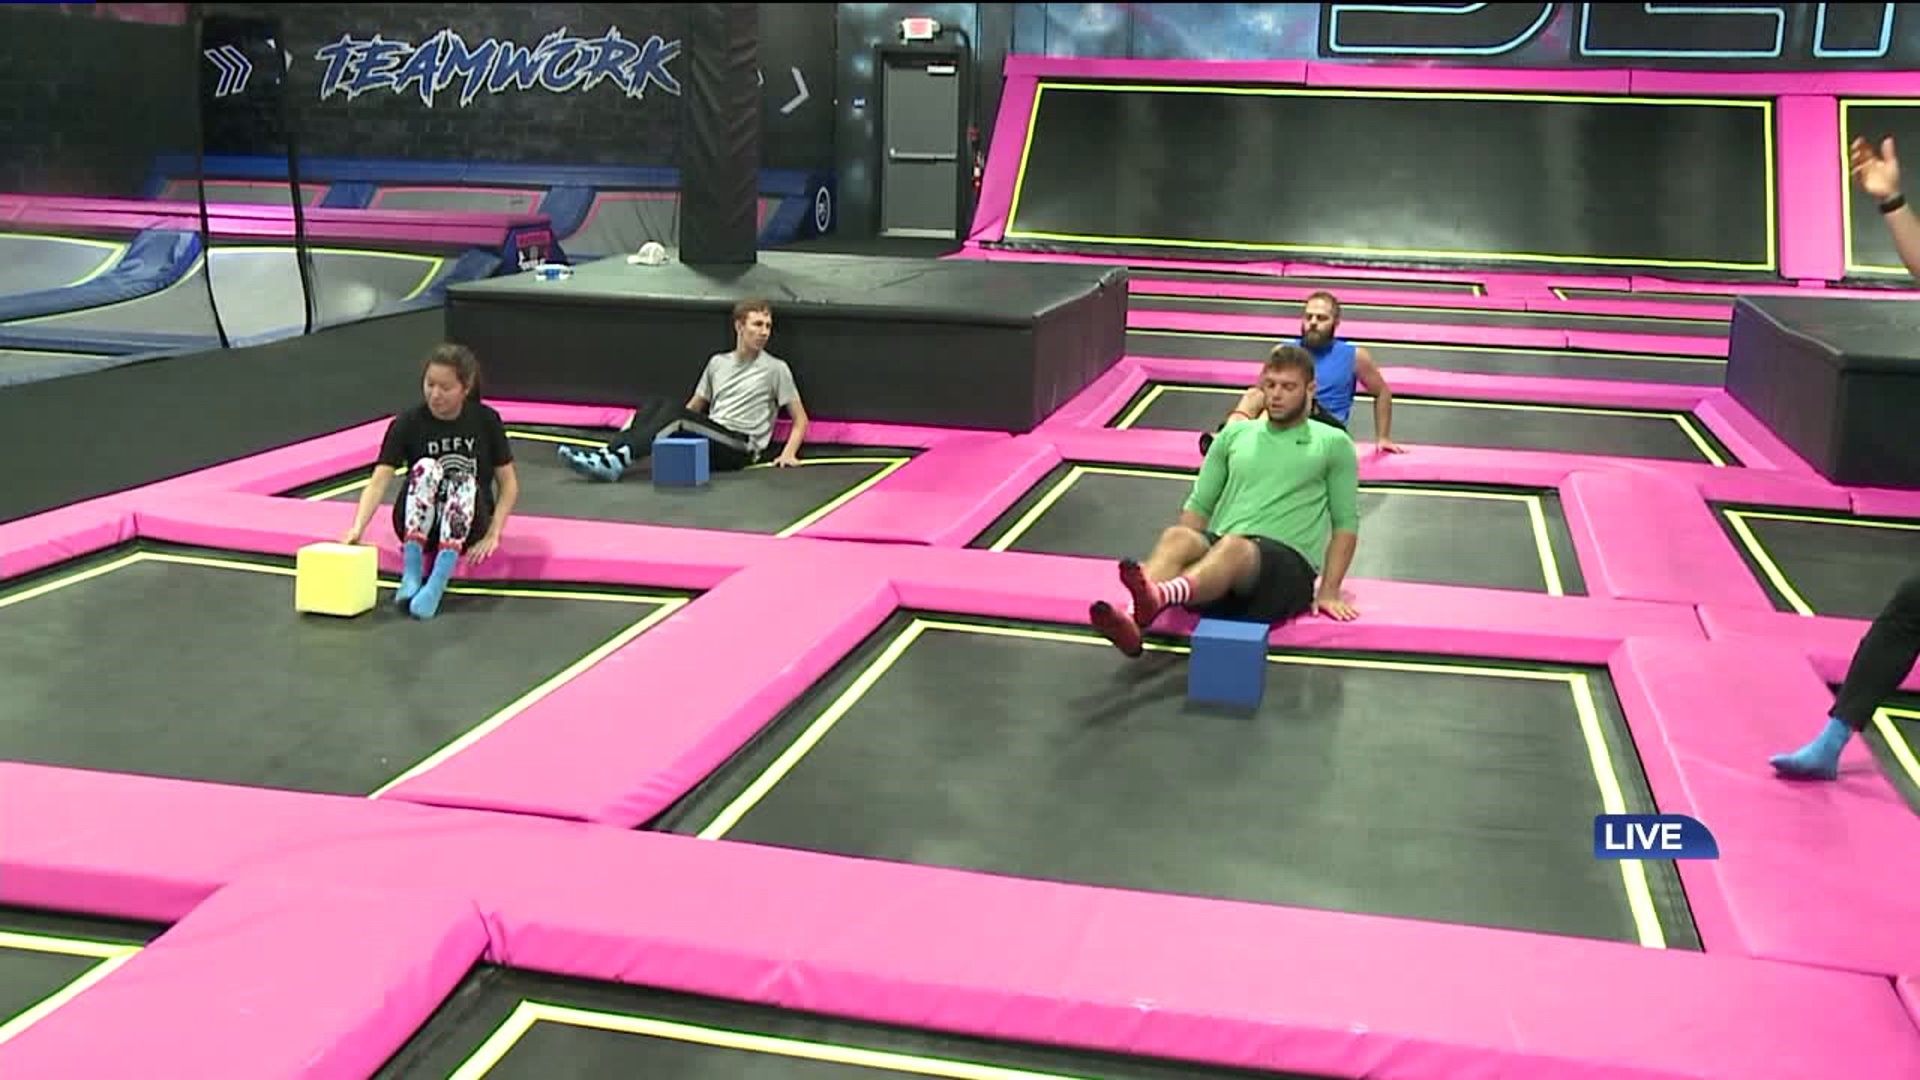 Bounce Away the Pounds: New Workout Hits Scranton Area Trampoline Park